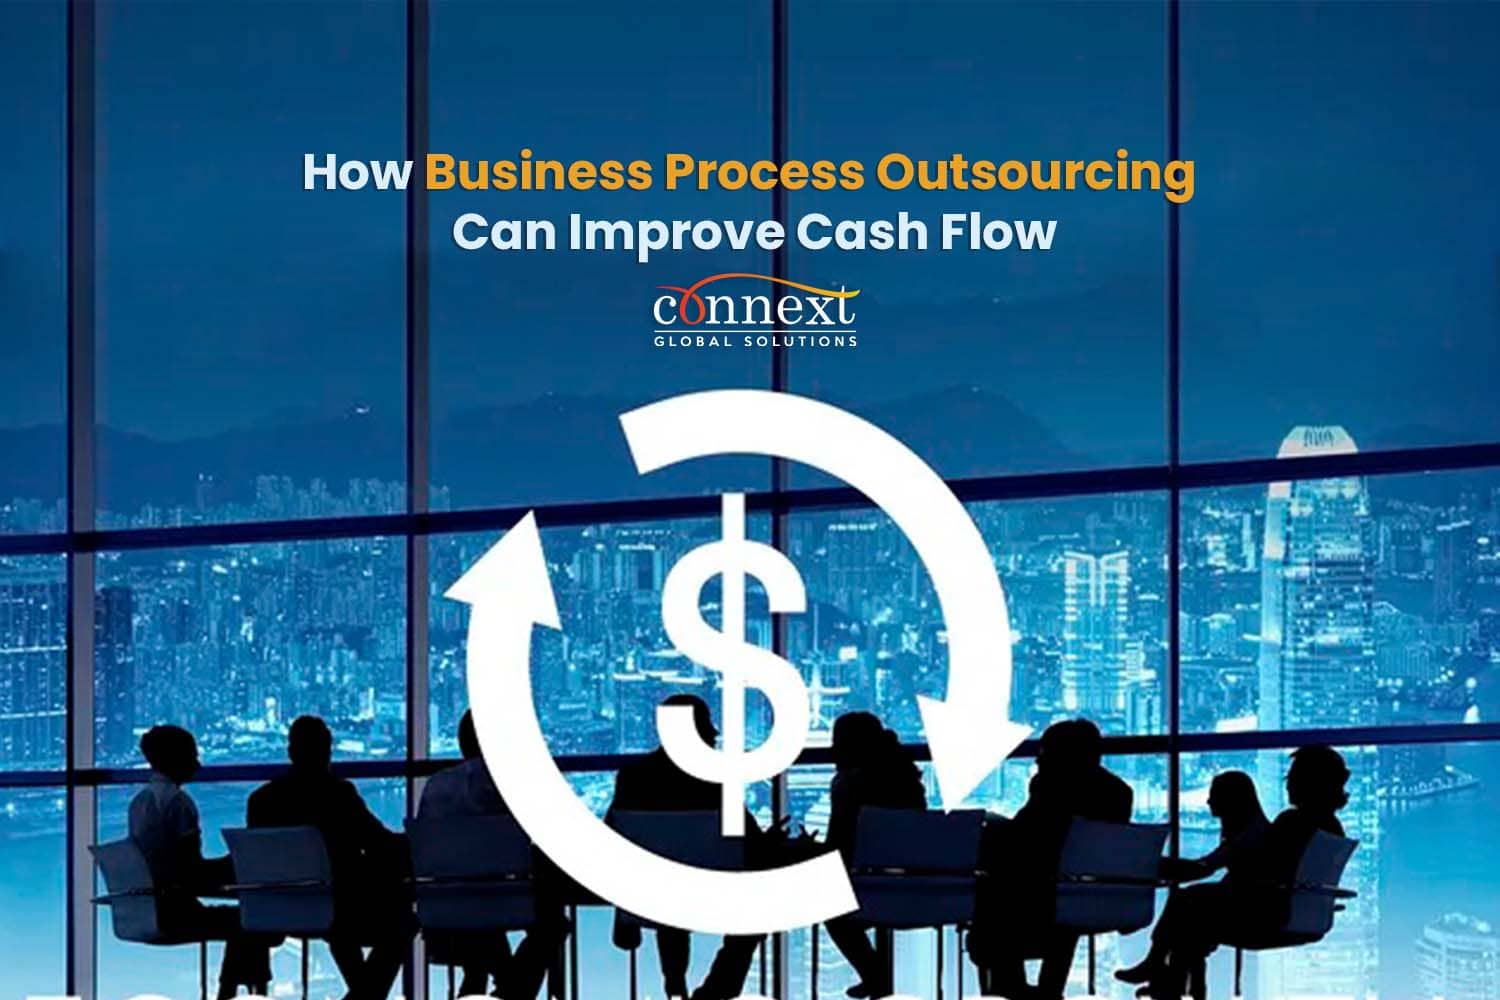 How Business Process Outsourcing Can Improve Cash Flow